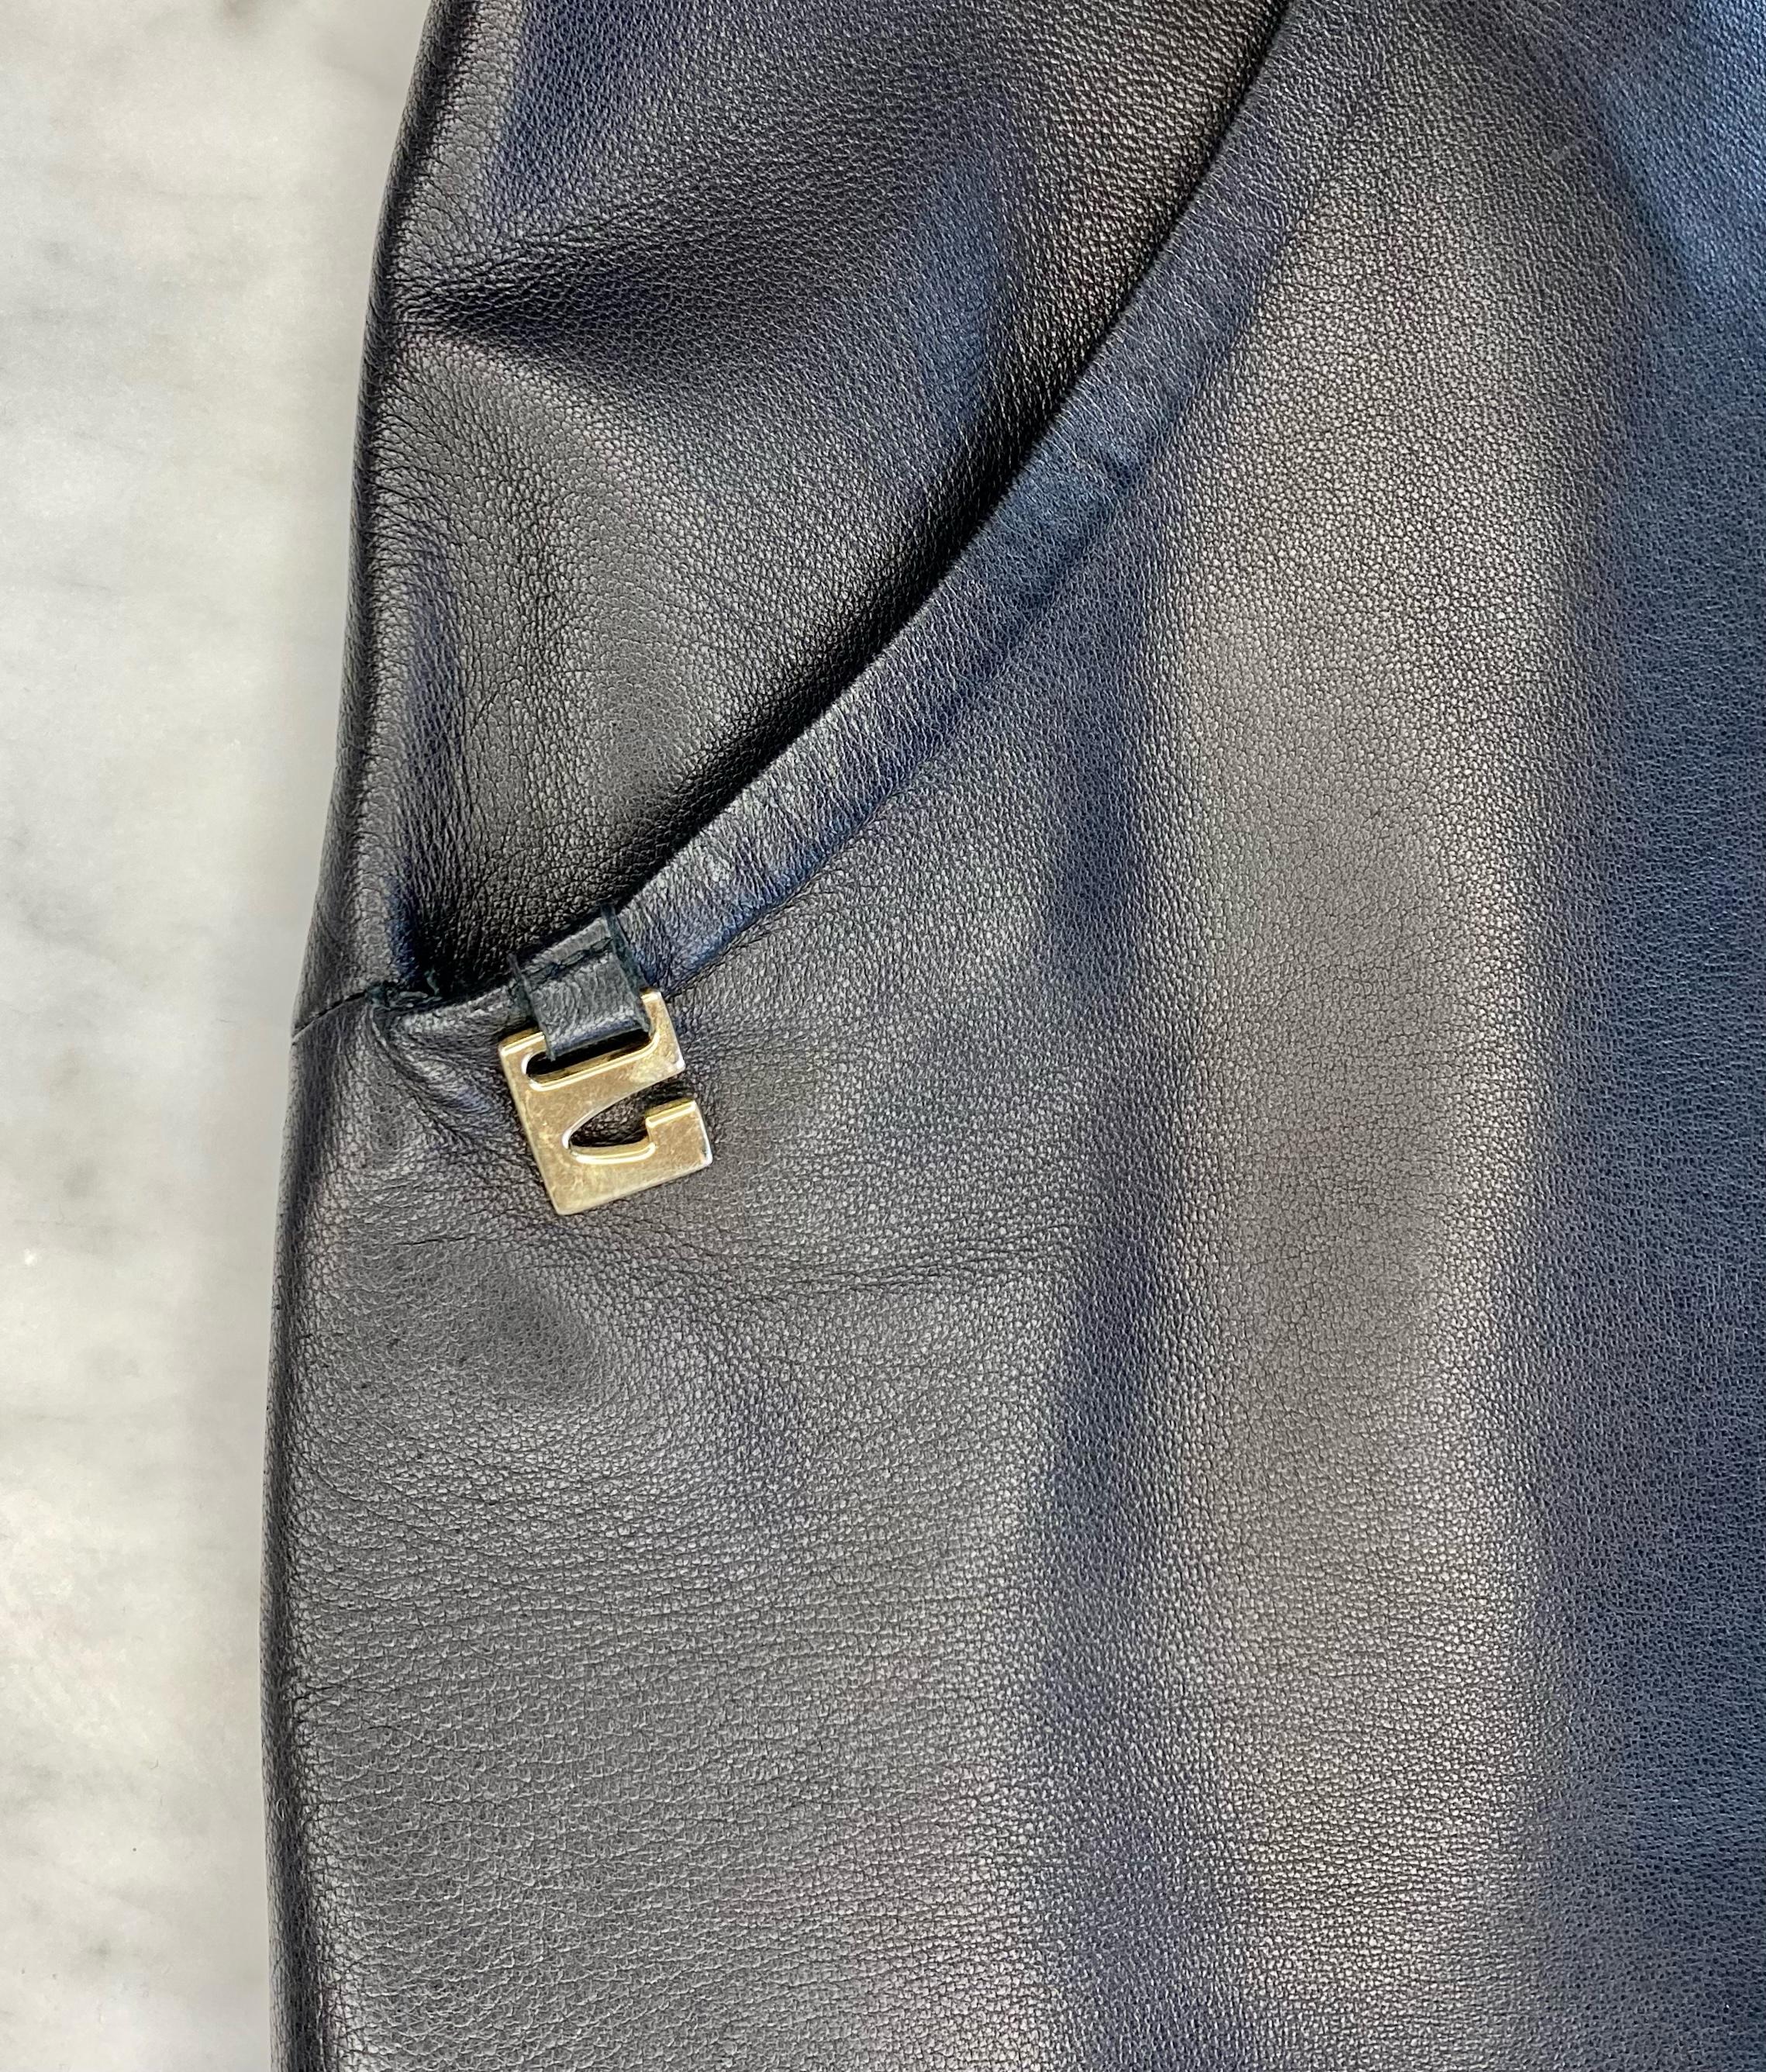 Presenting a rare leather tank top by Tom Ford for Gucci. This piece and features the classic Tom Ford 'G' medallion that was heavily featured in the S/S 1997 collection as well as two pockets at the waist. The leather was expertly cut to give a